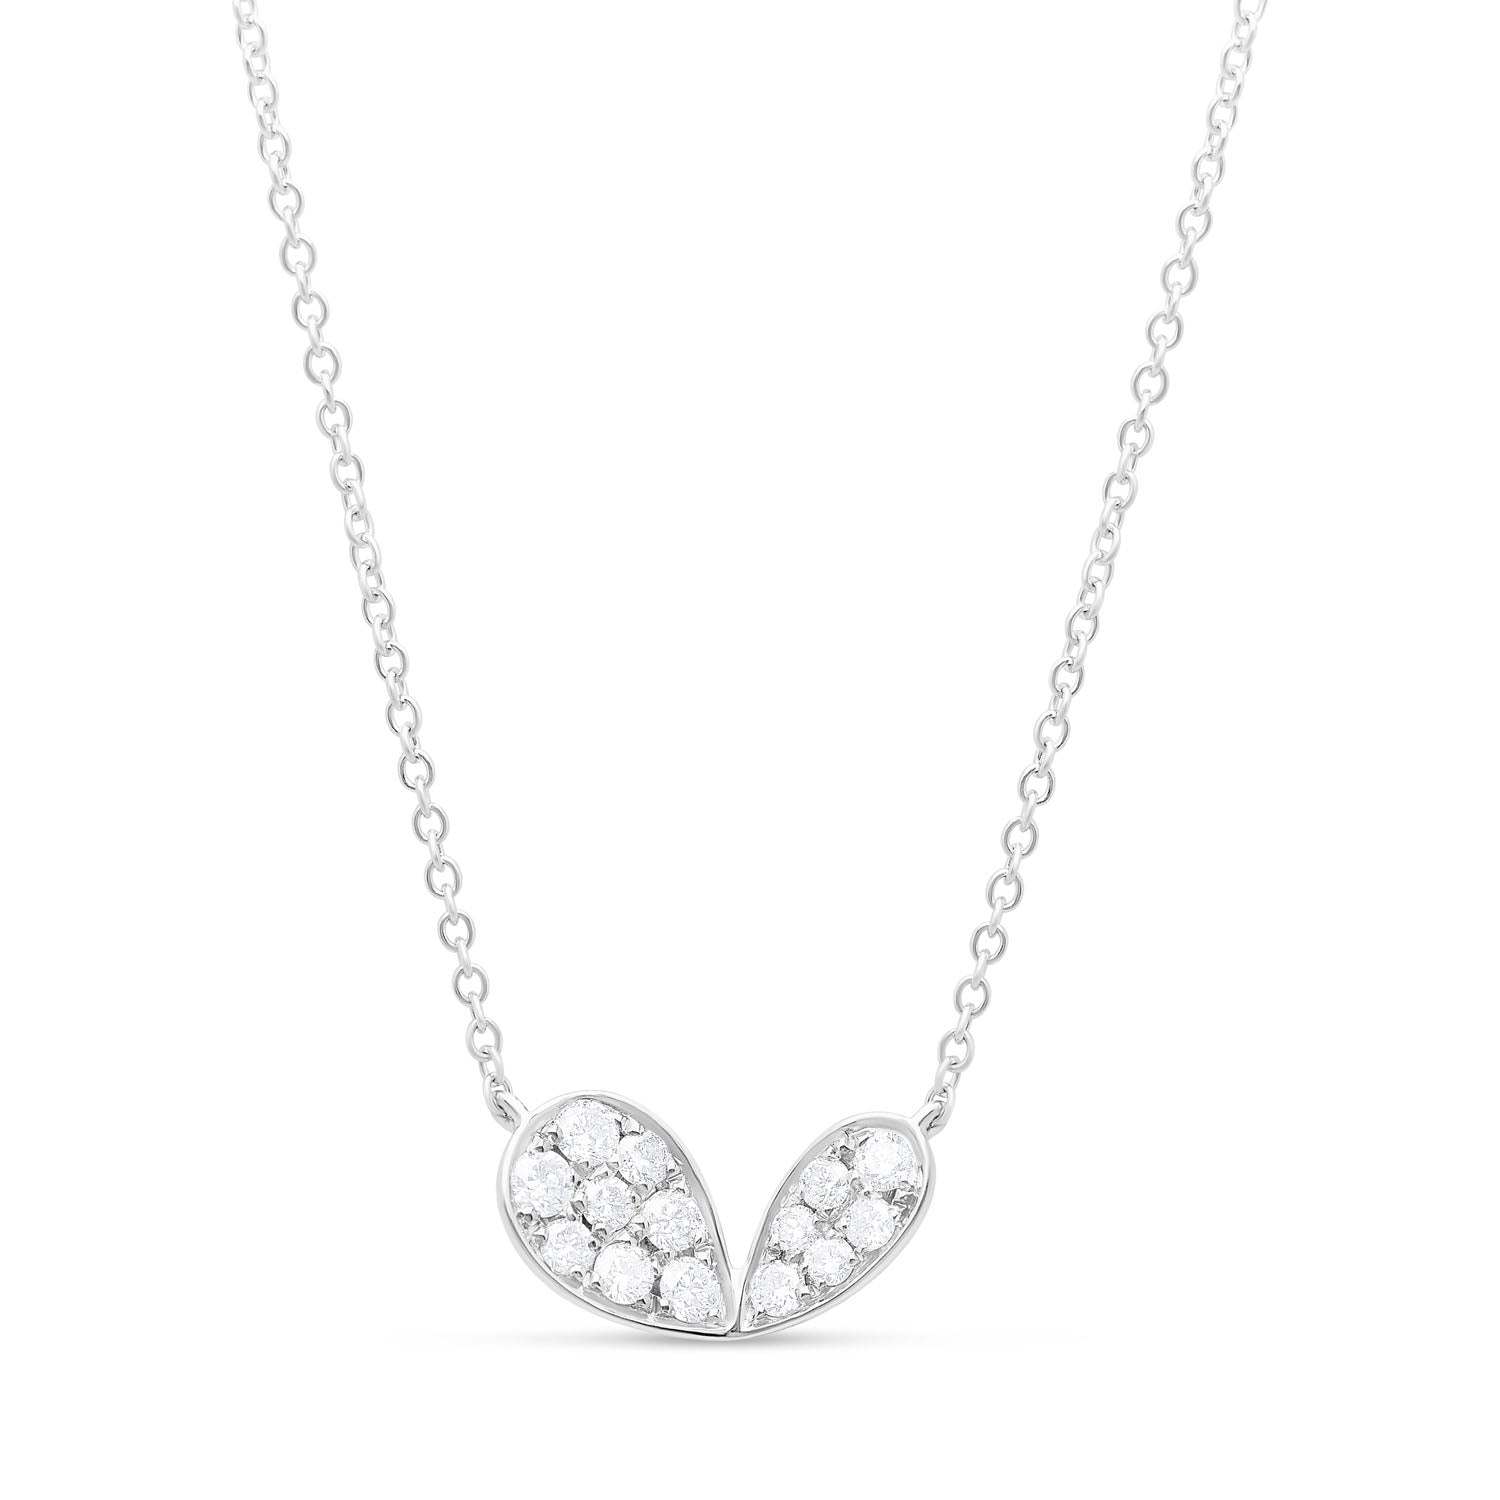 Whispers of Love Mini Necklace - White Gold